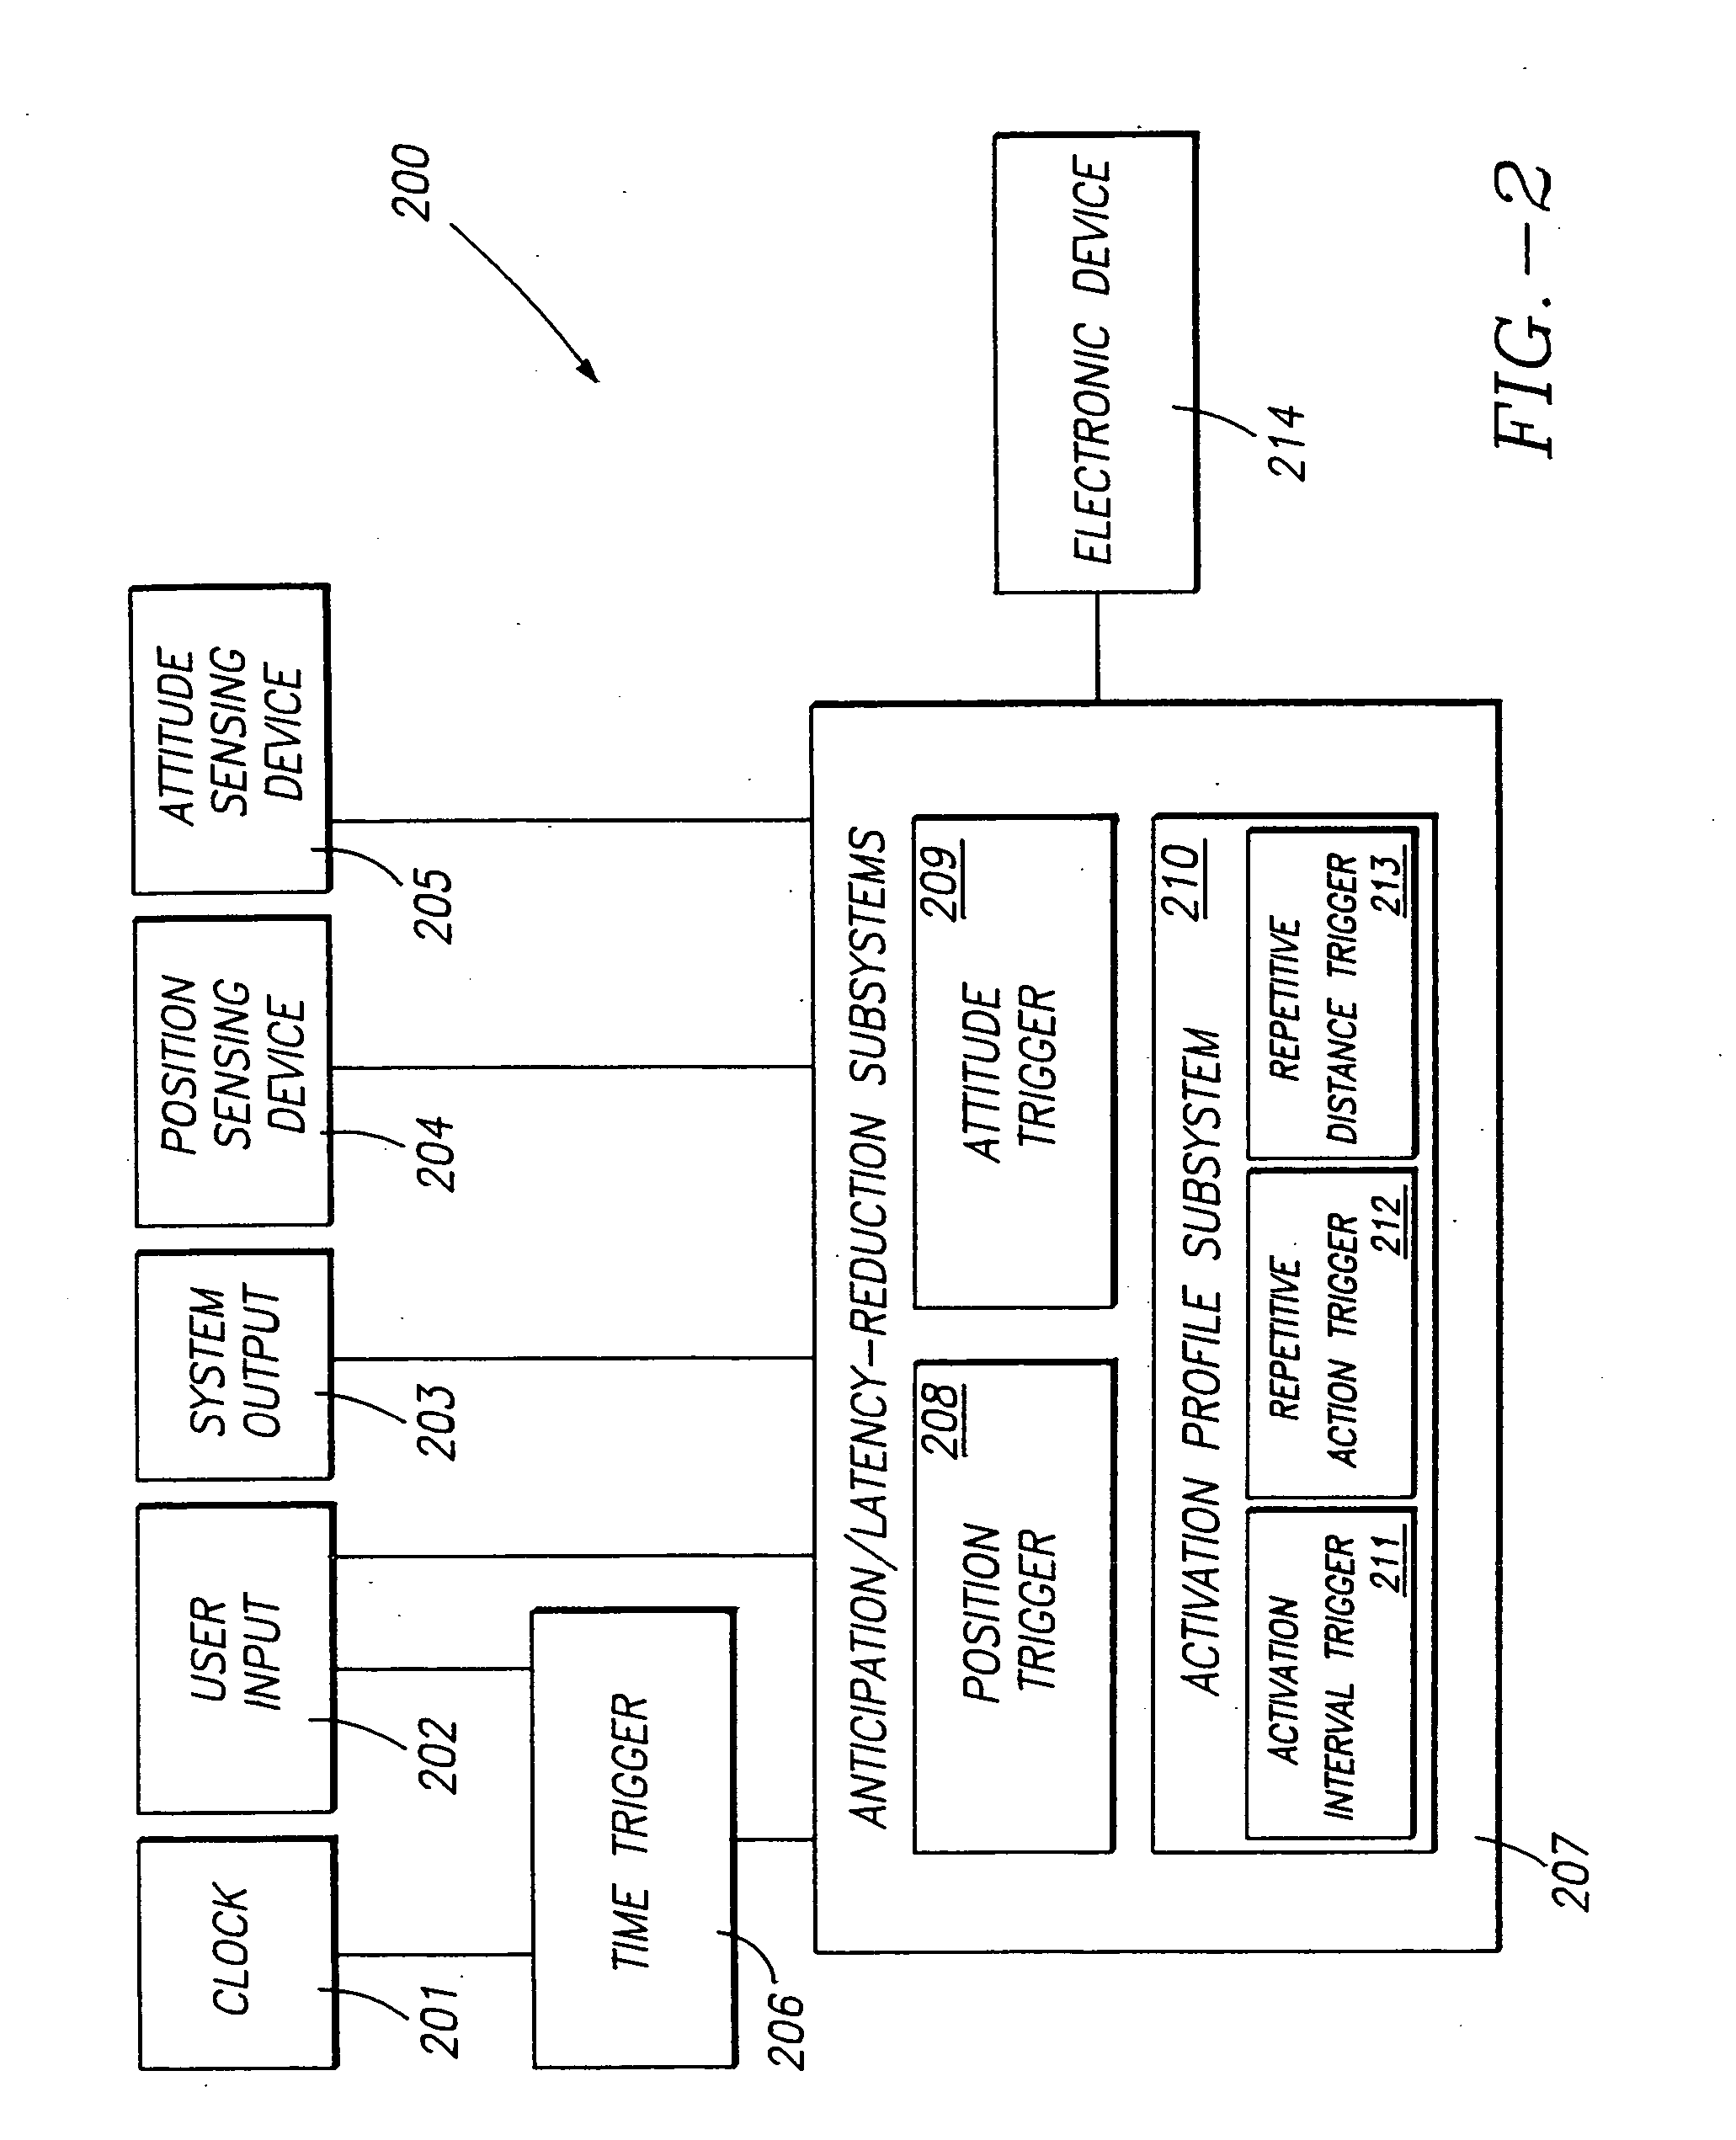 Method and apparatus for controlling the operational mode of electronic devices in response to sensed conditions